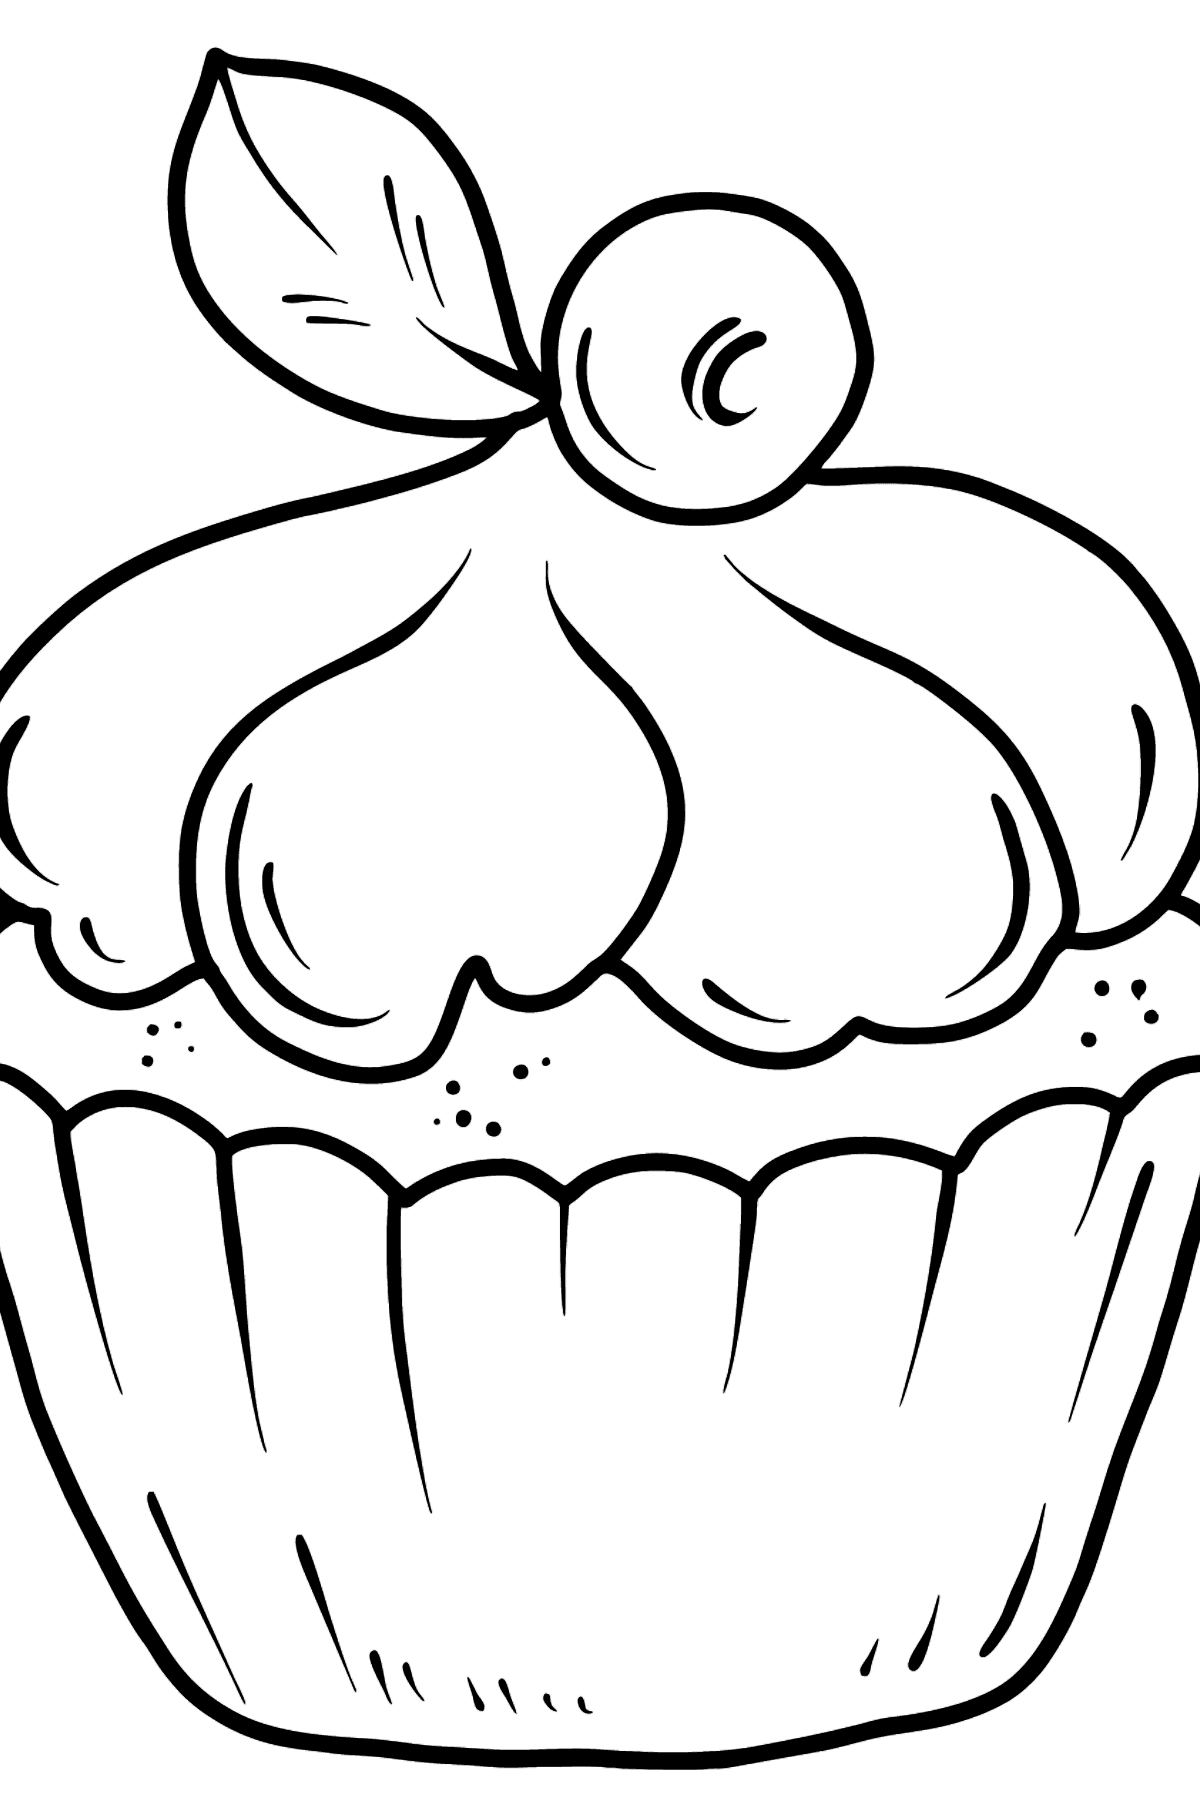 Cupcake with Cream coloring page - Coloring Pages for Kids